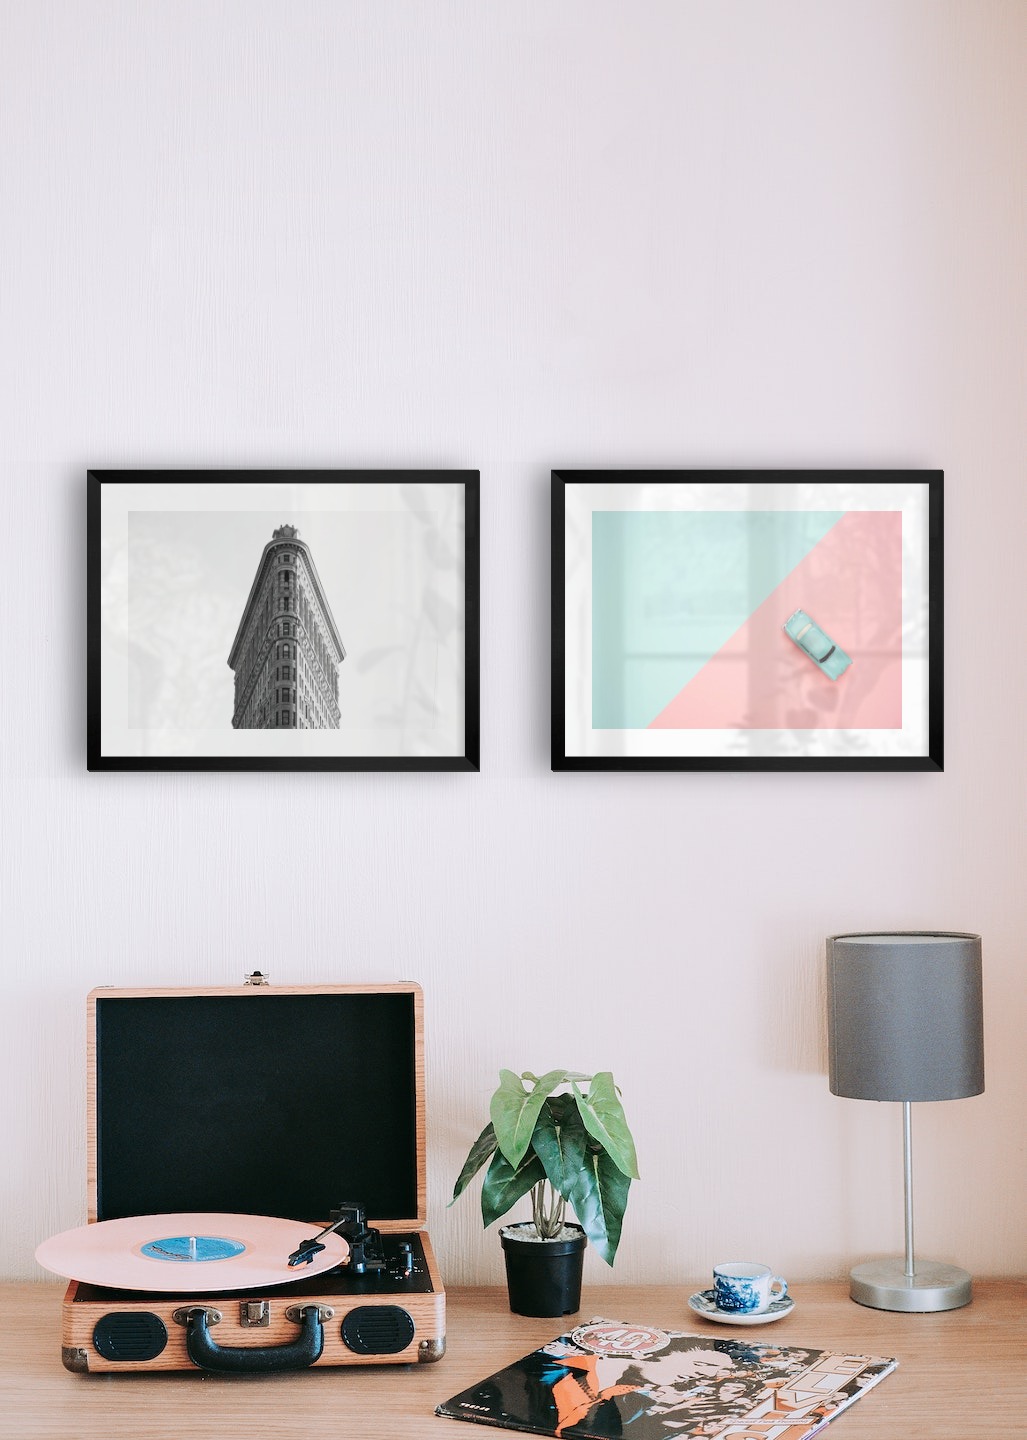 Gallery wall with picture frames in black in sizes 30x40 with prints "Triangular building" and "Blue car and pink"